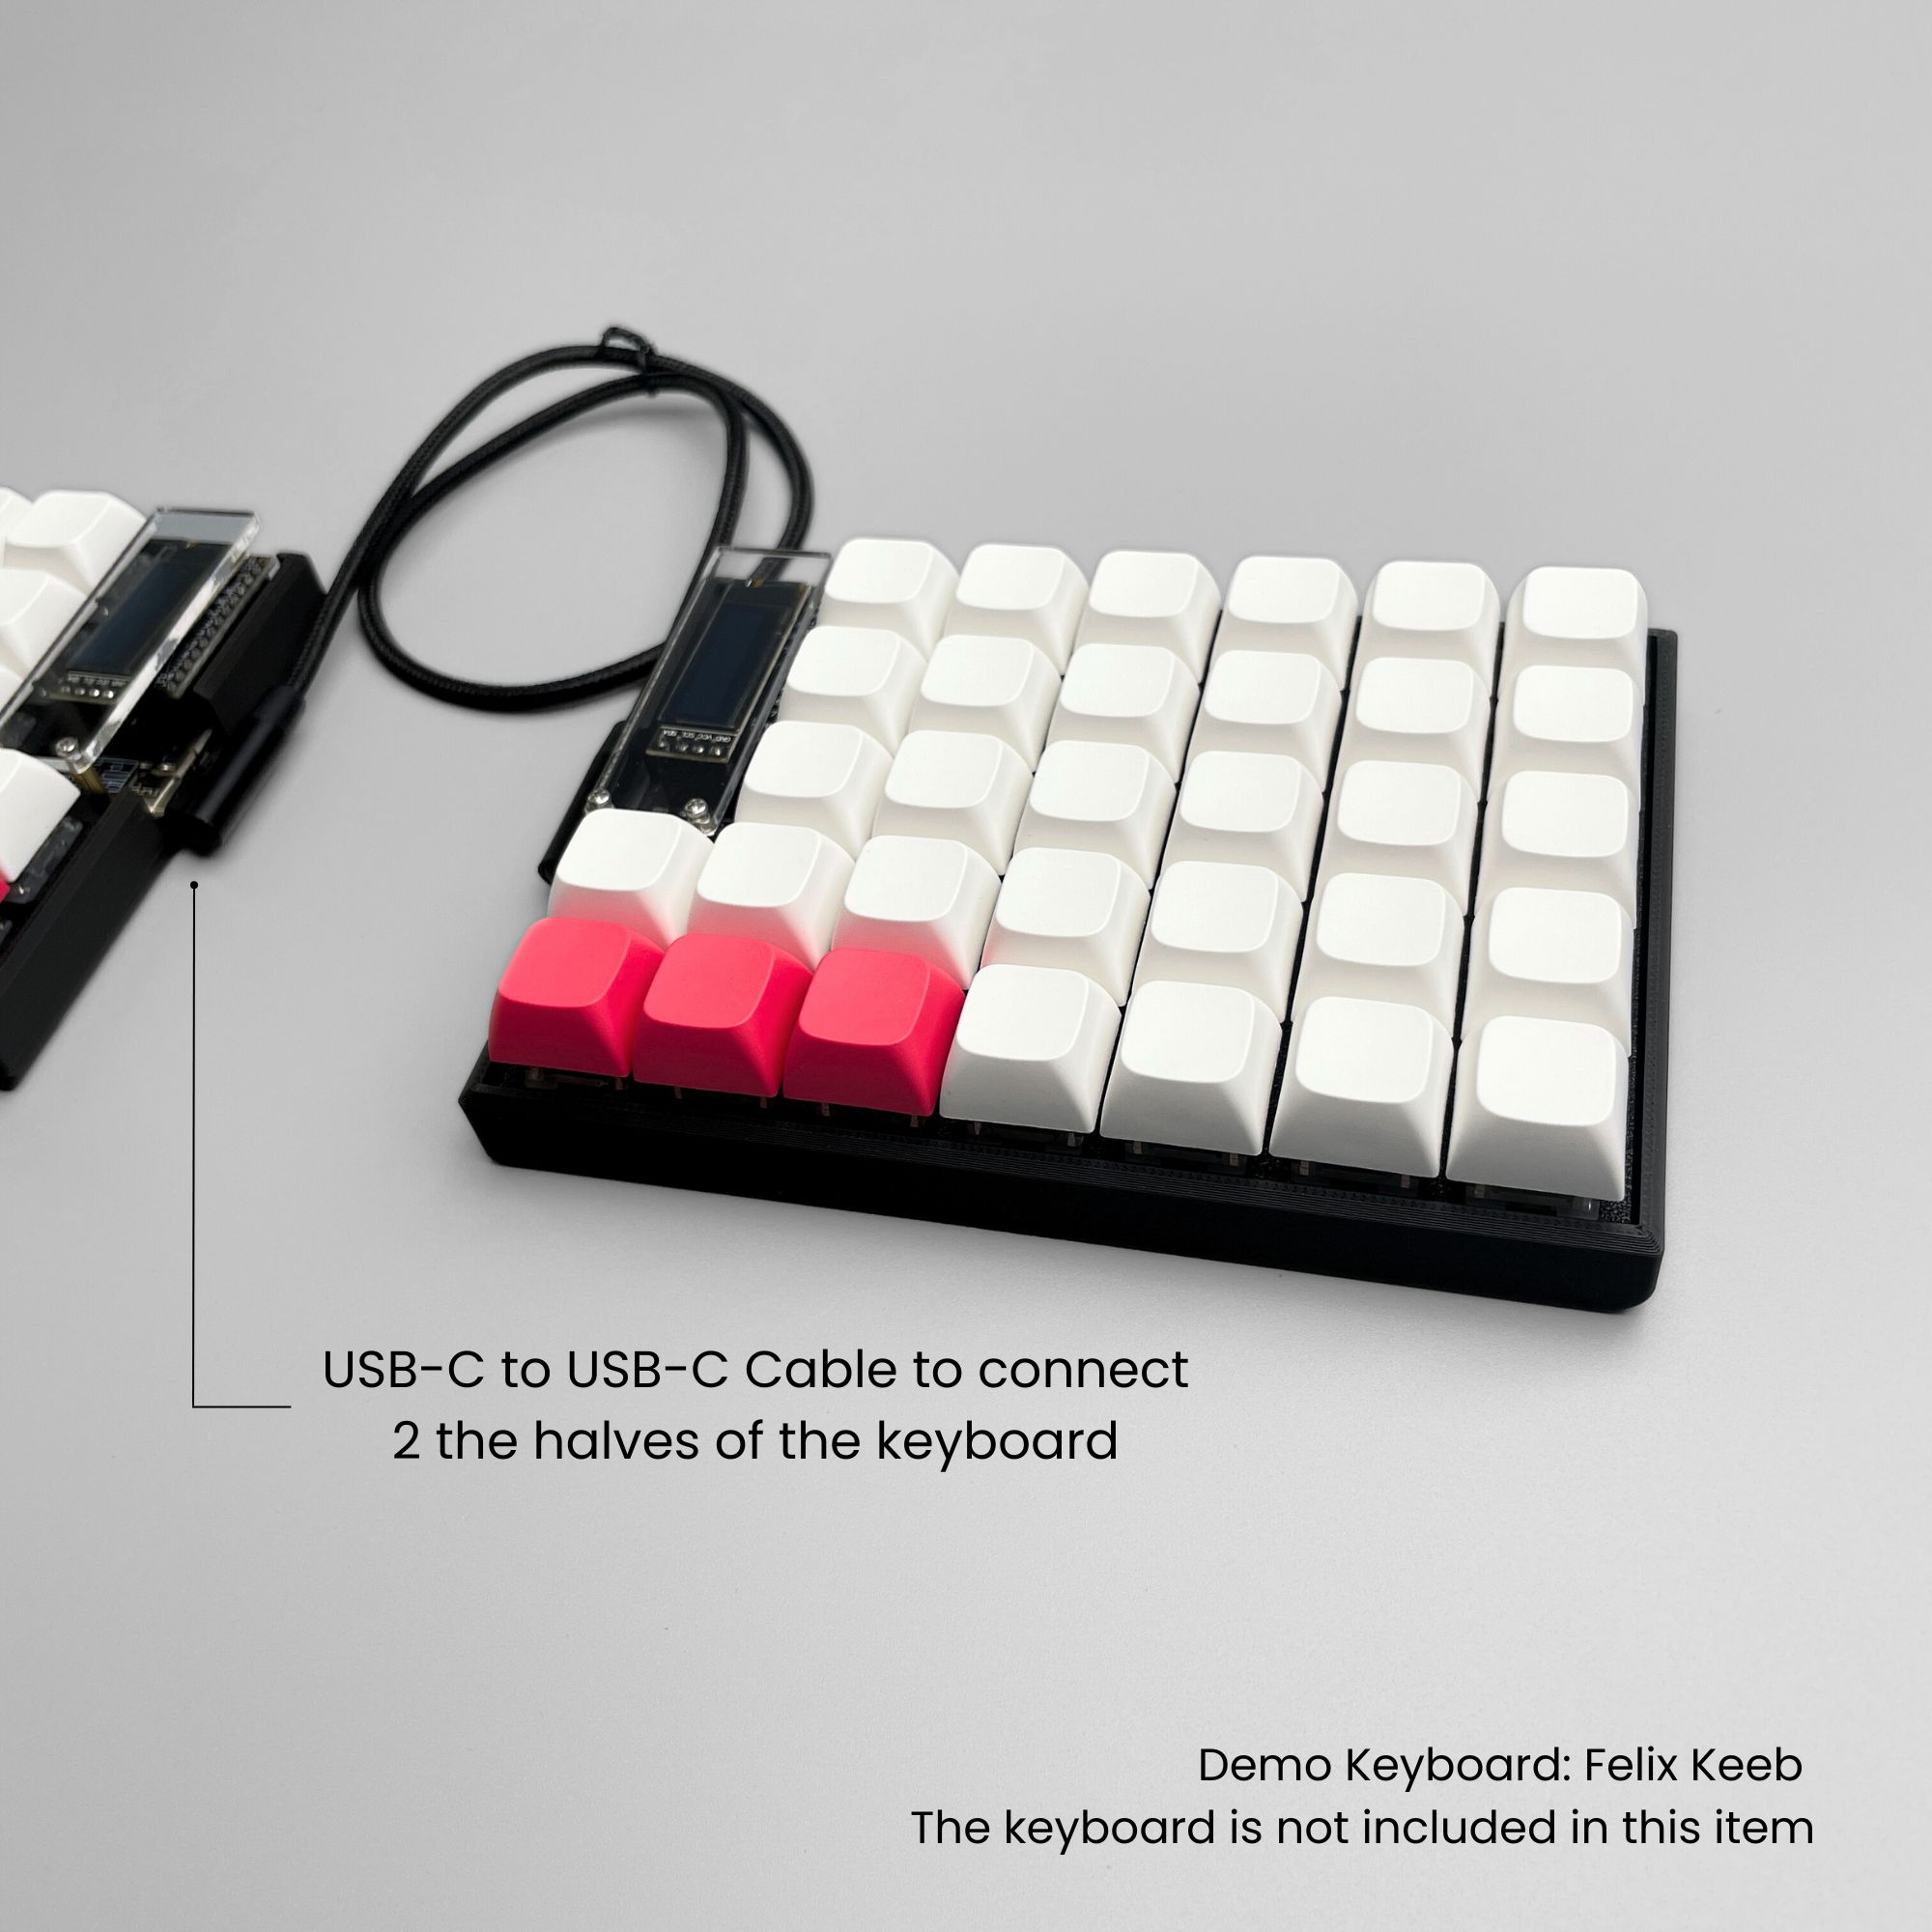 USB-C to USB-C L Shape cable for connection split keyboards Demo in Felix Keeb